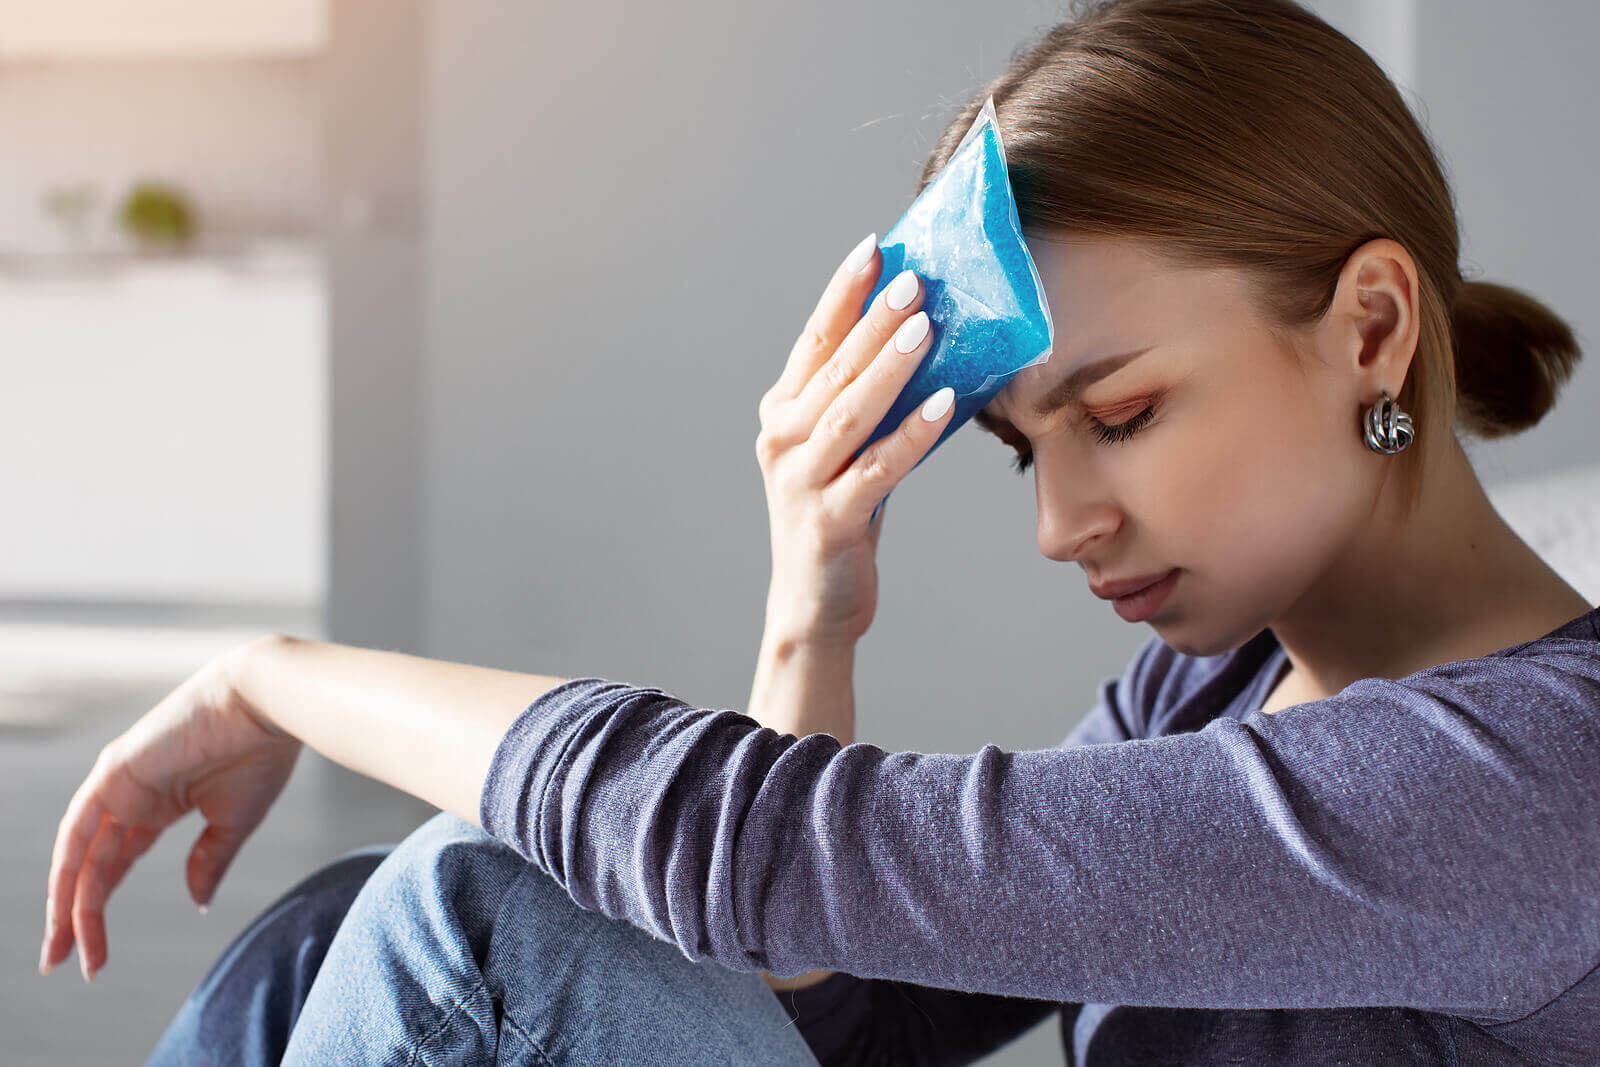 How to treat headaches: a cold compress.